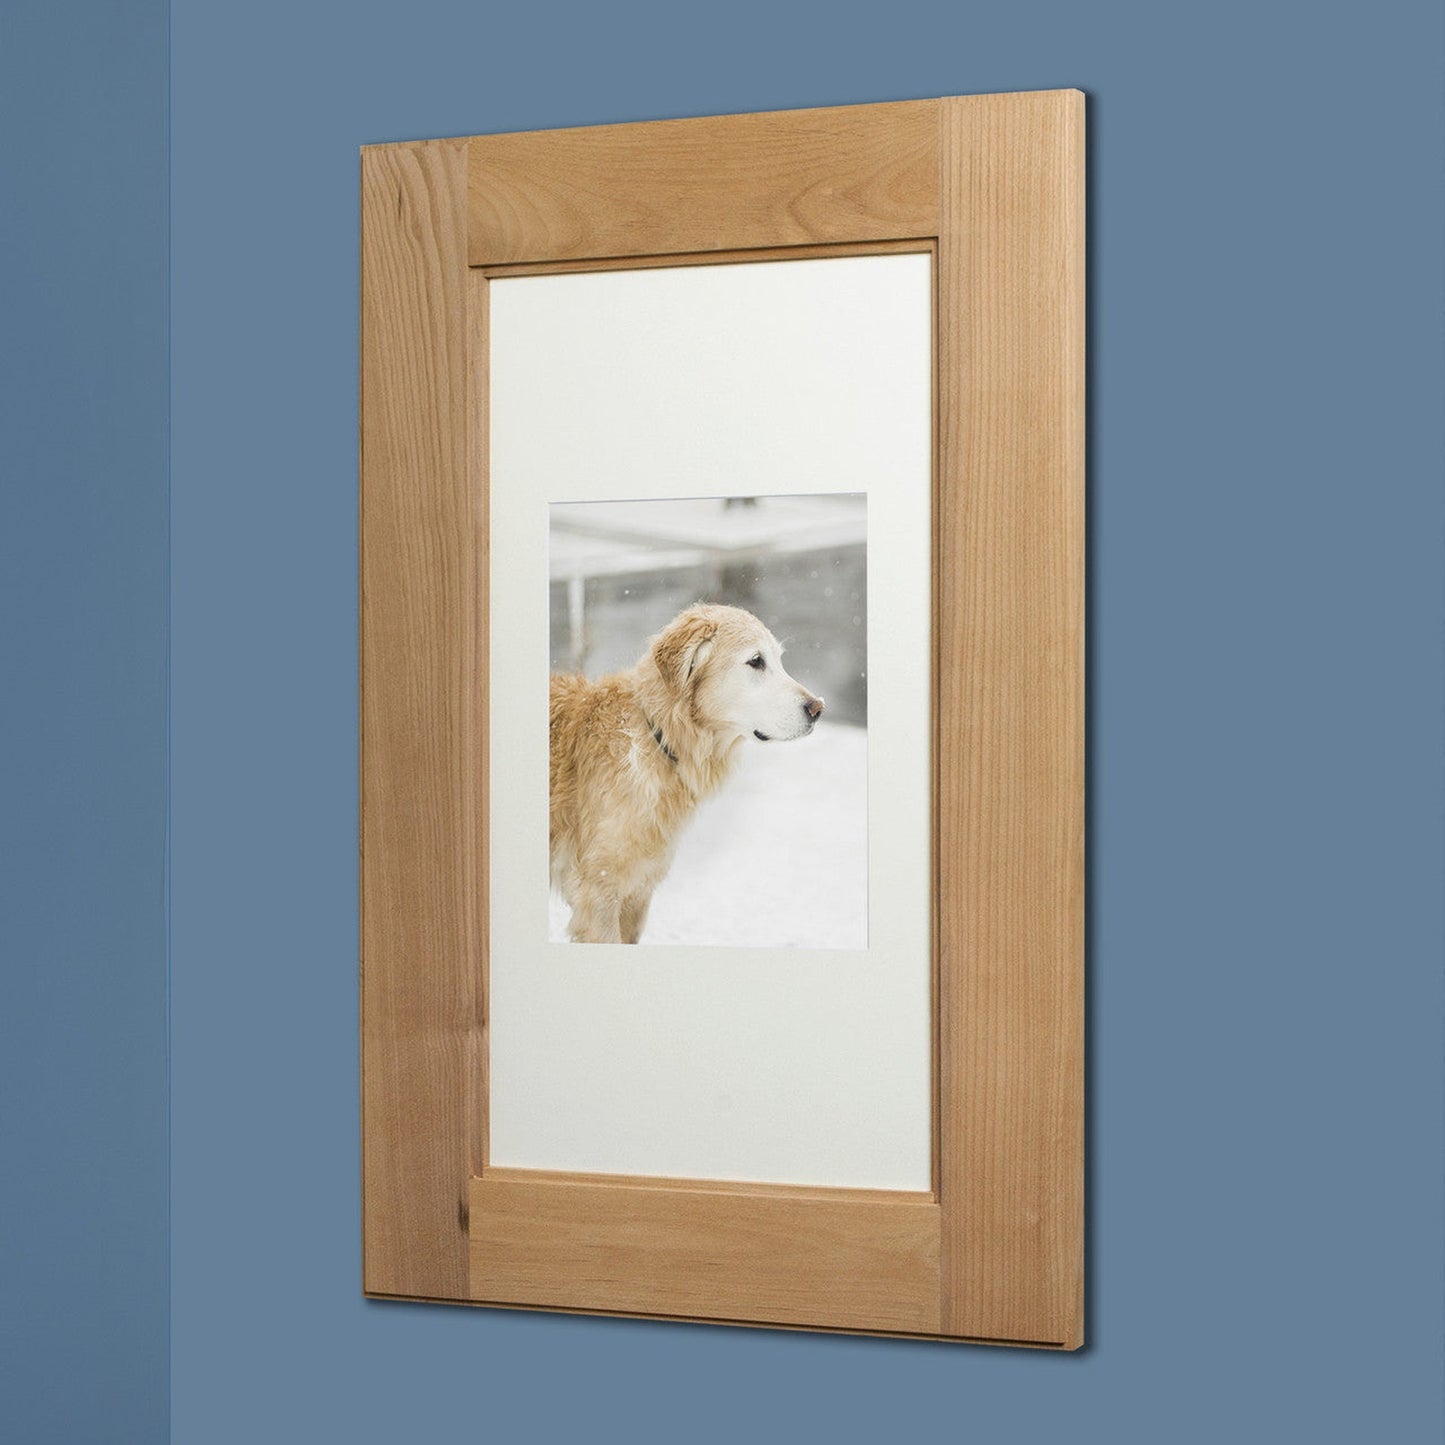 Fox Hollow Furnishings 14" x 24" Extra Large Unfinished Special 6" Depth White Interior Recessed Picture Frame Medicine Cabinet With Mirror